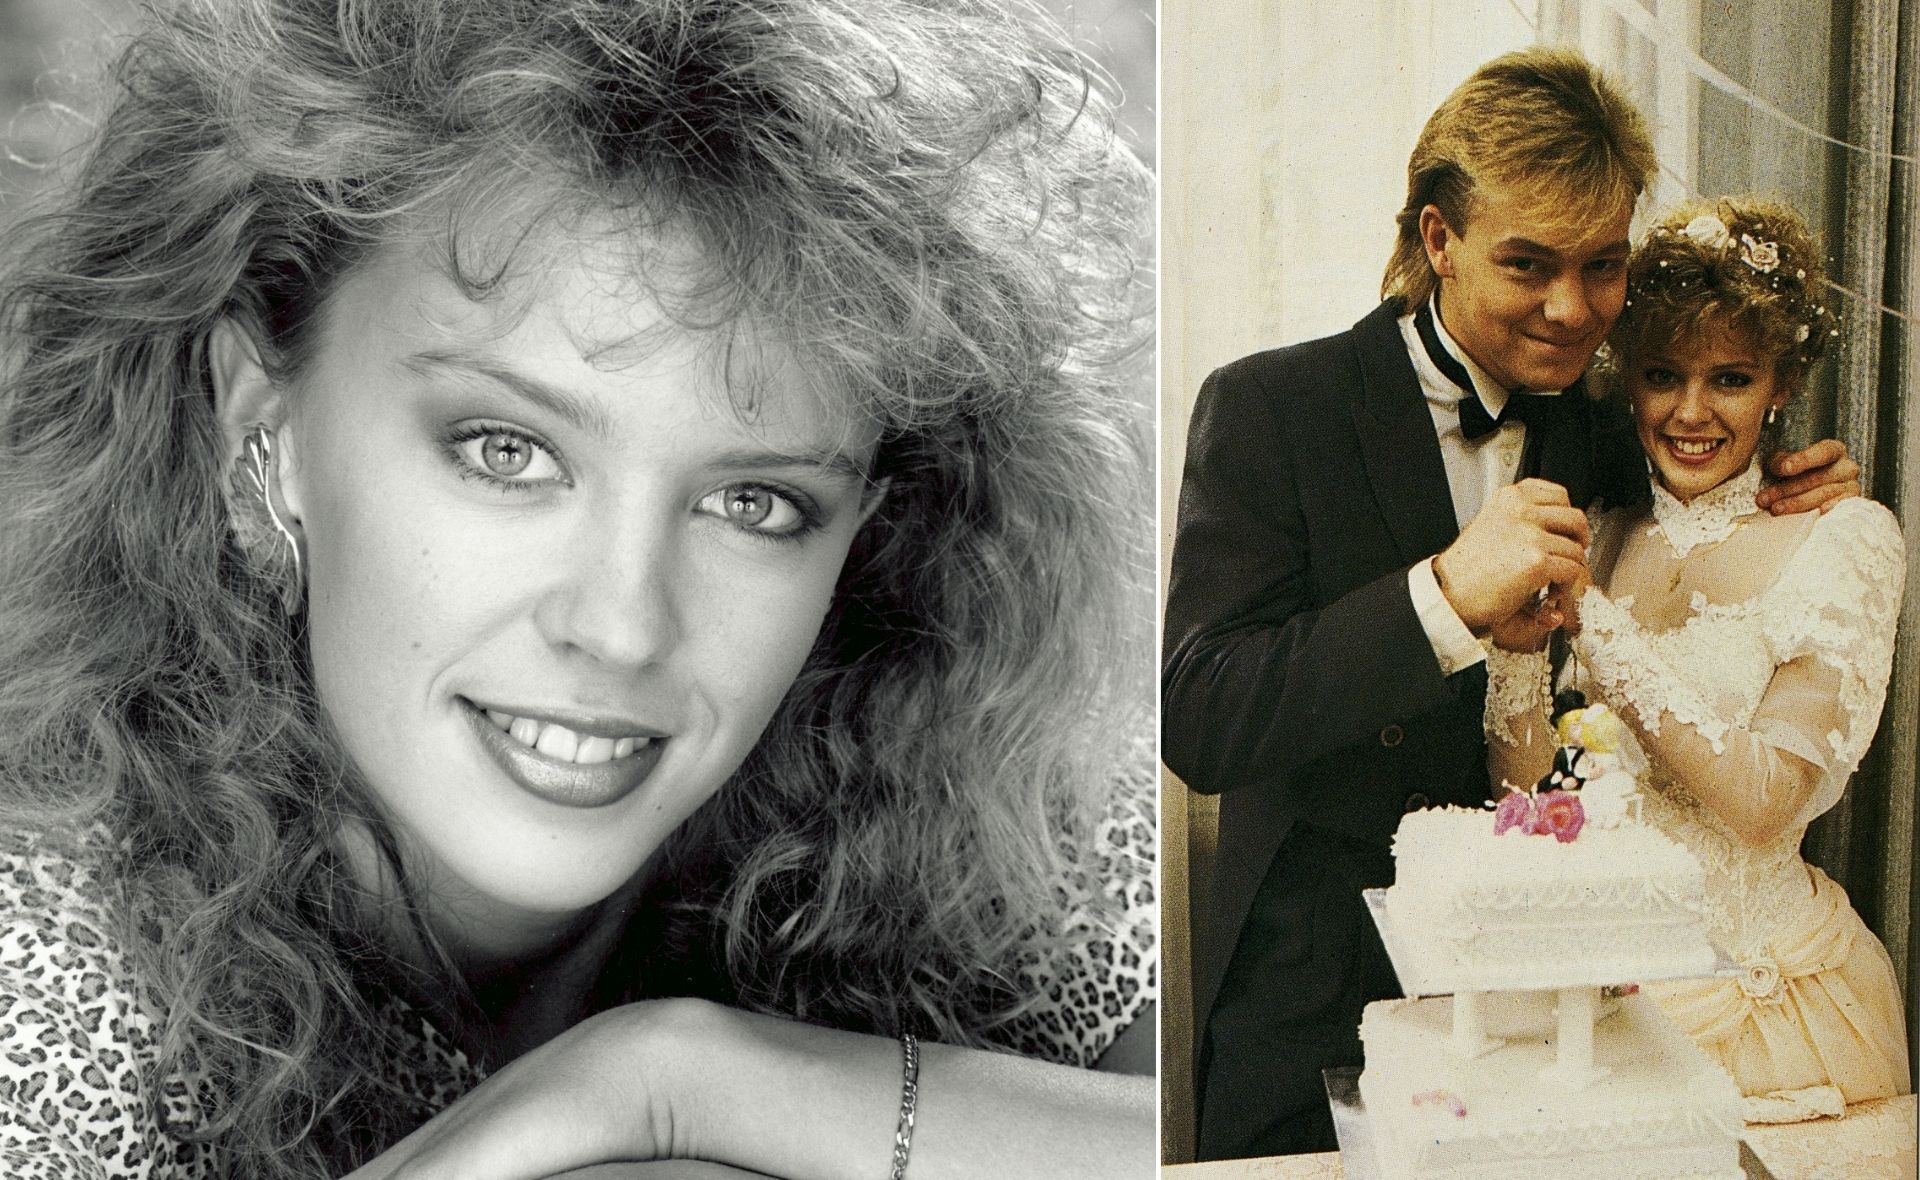 As we say goodbye to Neighbours, let’s celebrate Kylie Minogue’s most stunning moments as Charlene